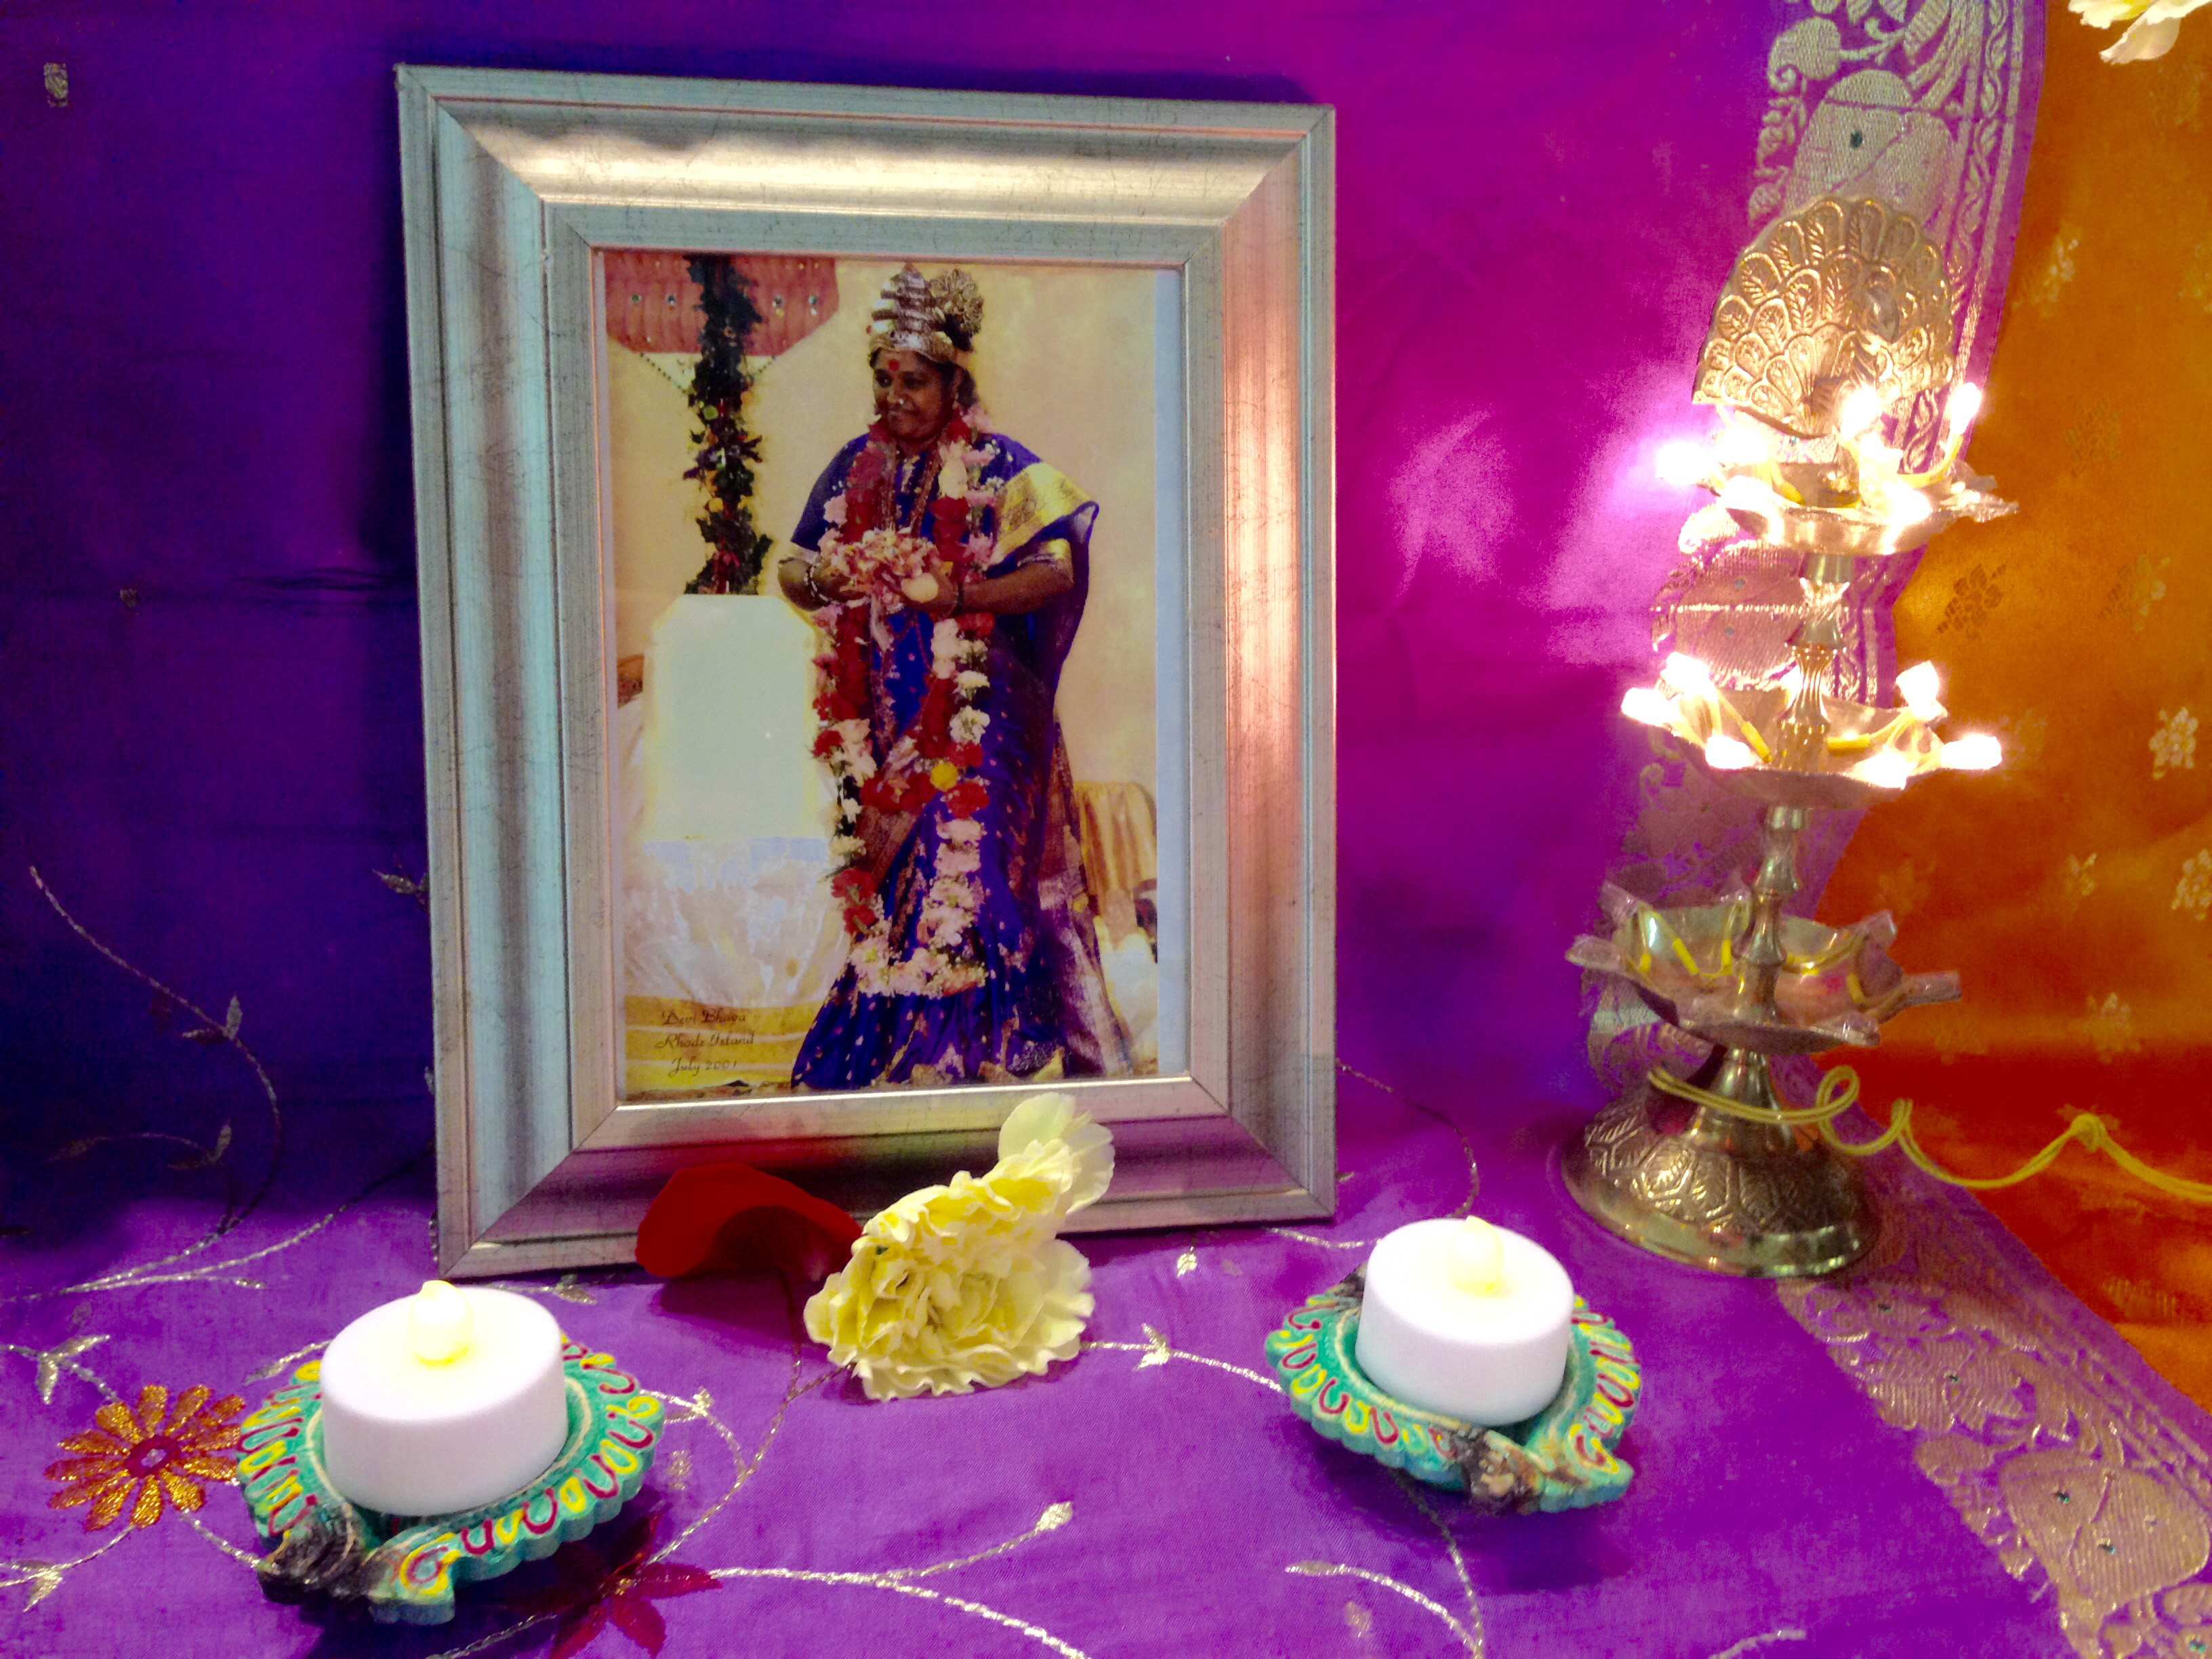 Flowers before photo of Amma in Devi Bhava next to a lit Lamp